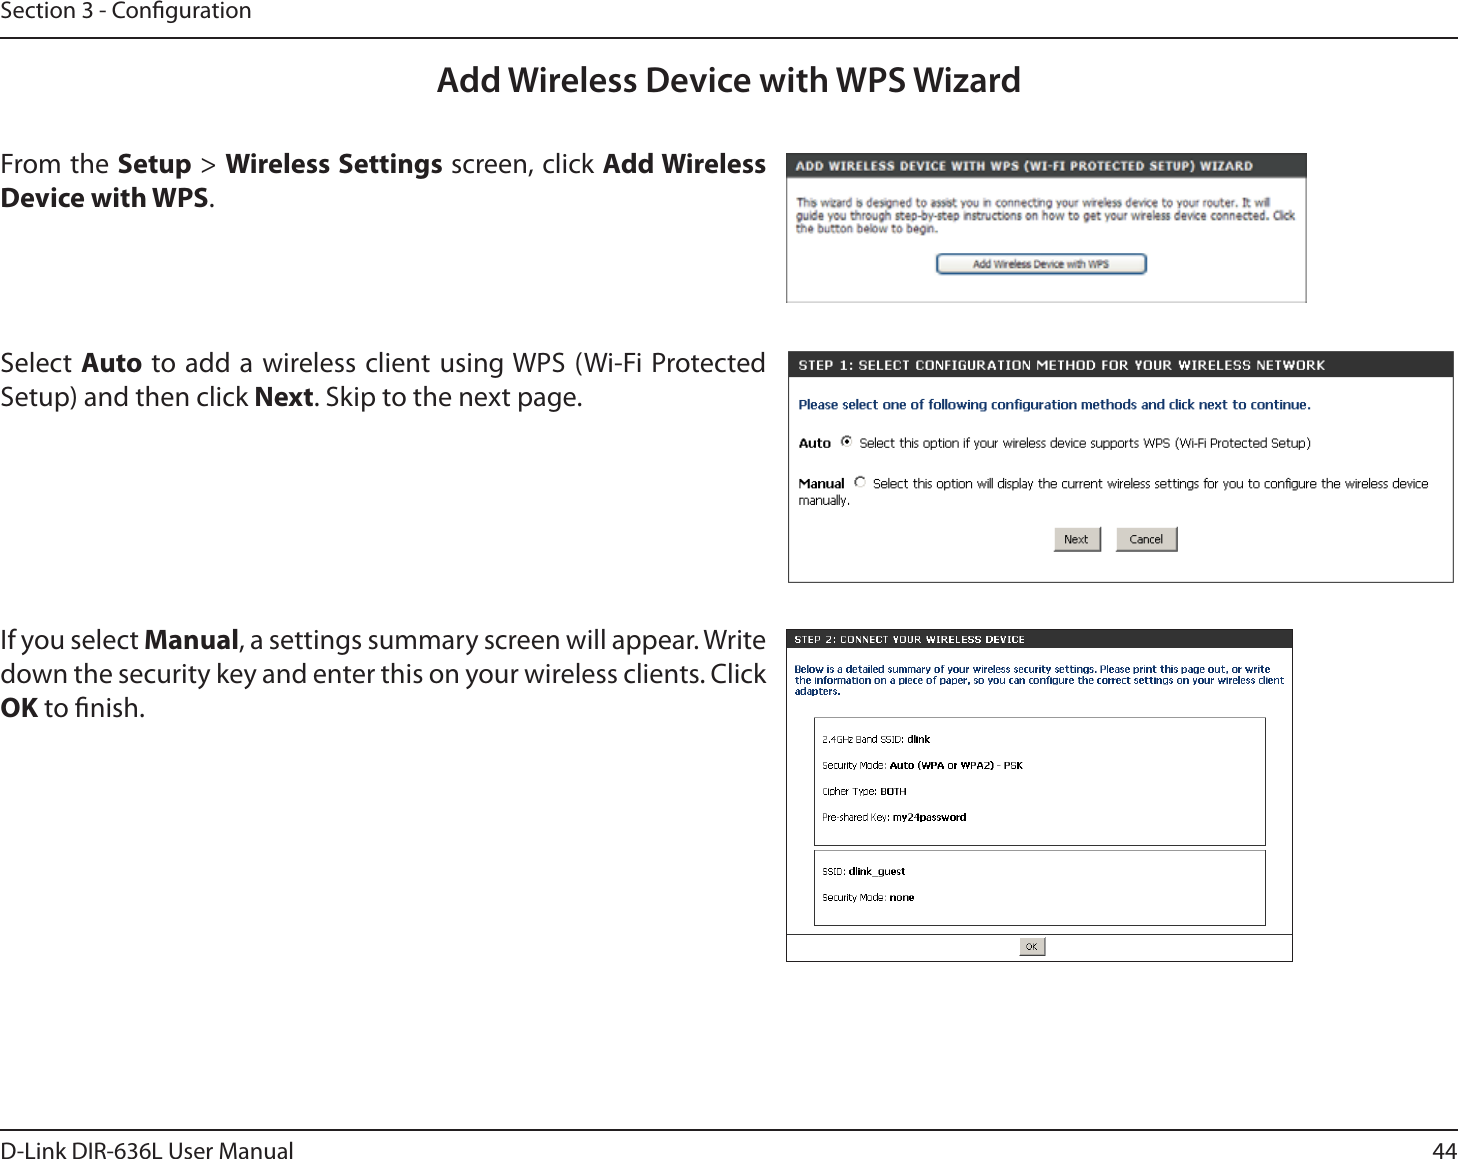 44D-Link DIR-636L User ManualSection 3 - CongurationFrom the Setup &gt; Wireless Settings screen, click Add Wireless Device with WPS.Add Wireless Device with WPS WizardIf you select Manual, a settings summary screen will appear. Write down the security key and enter this on your wireless clients. Click OK to nish.Select Auto to add a wireless client using WPS (Wi-Fi Protected Setup) and then click Next. Skip to the next page. 